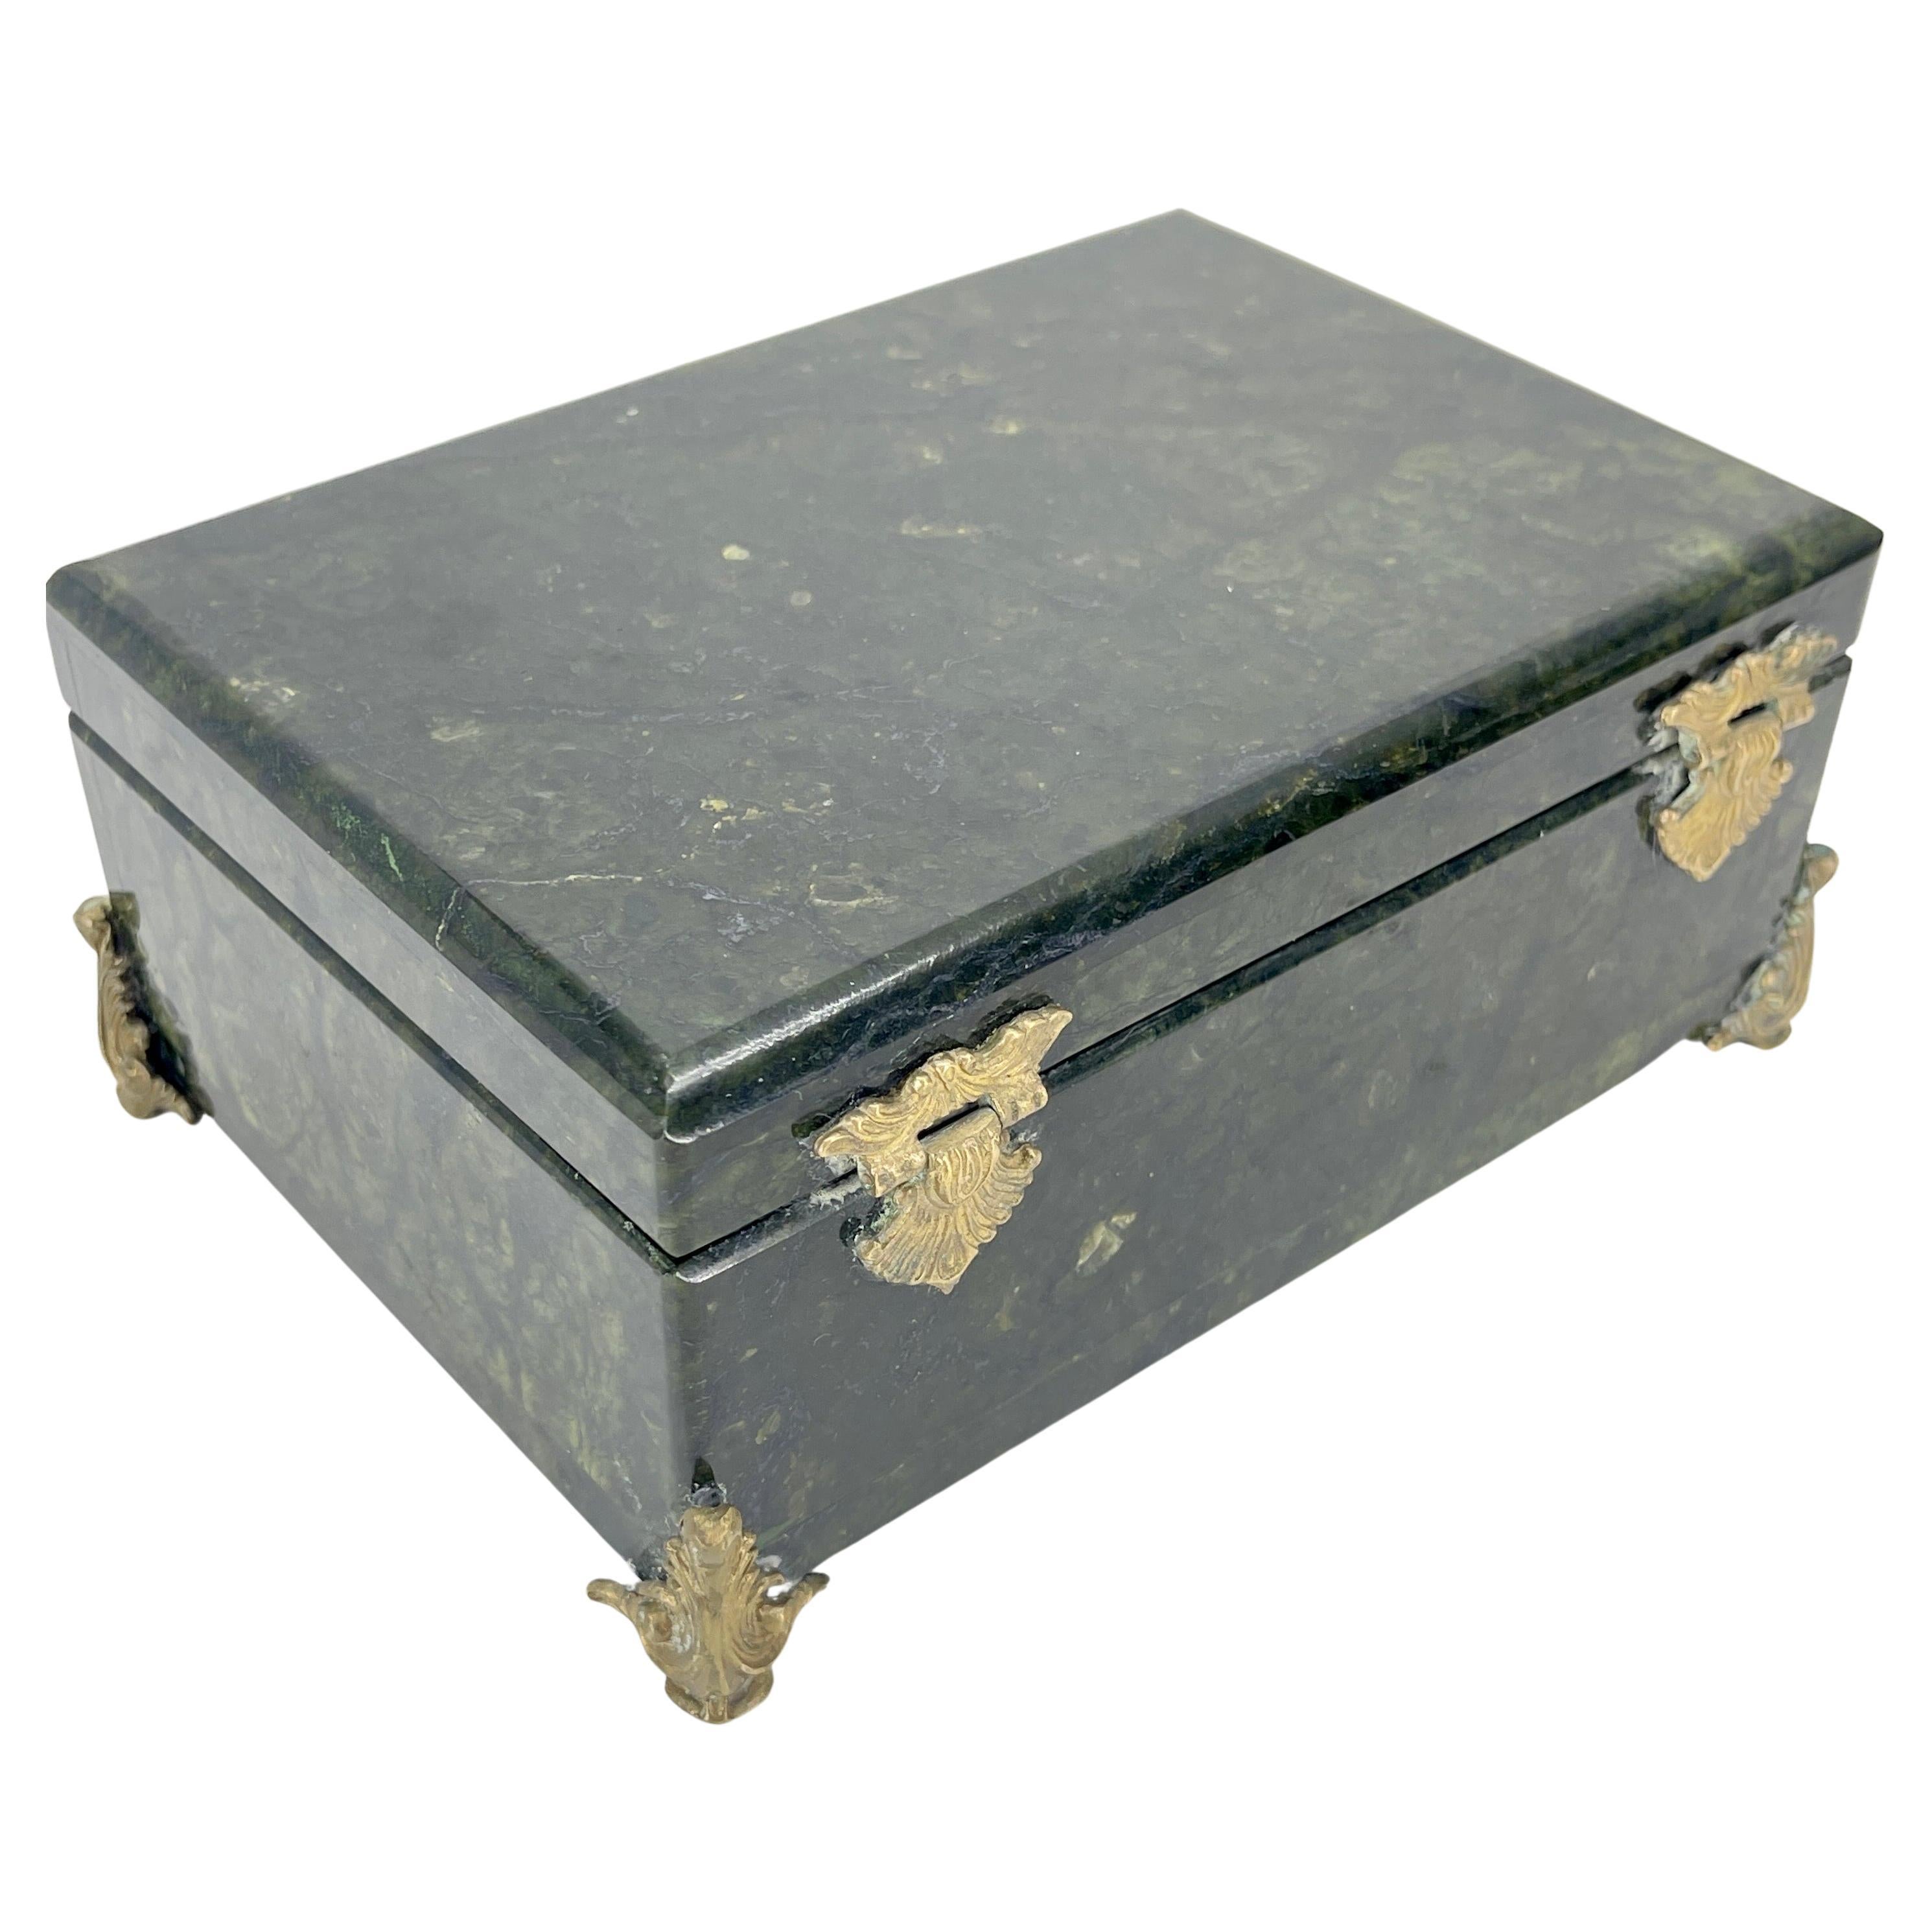 20th Century Rectangular Deep Forrest Green Marble and Bronze Jewelry Box, Italian circa 1930 For Sale